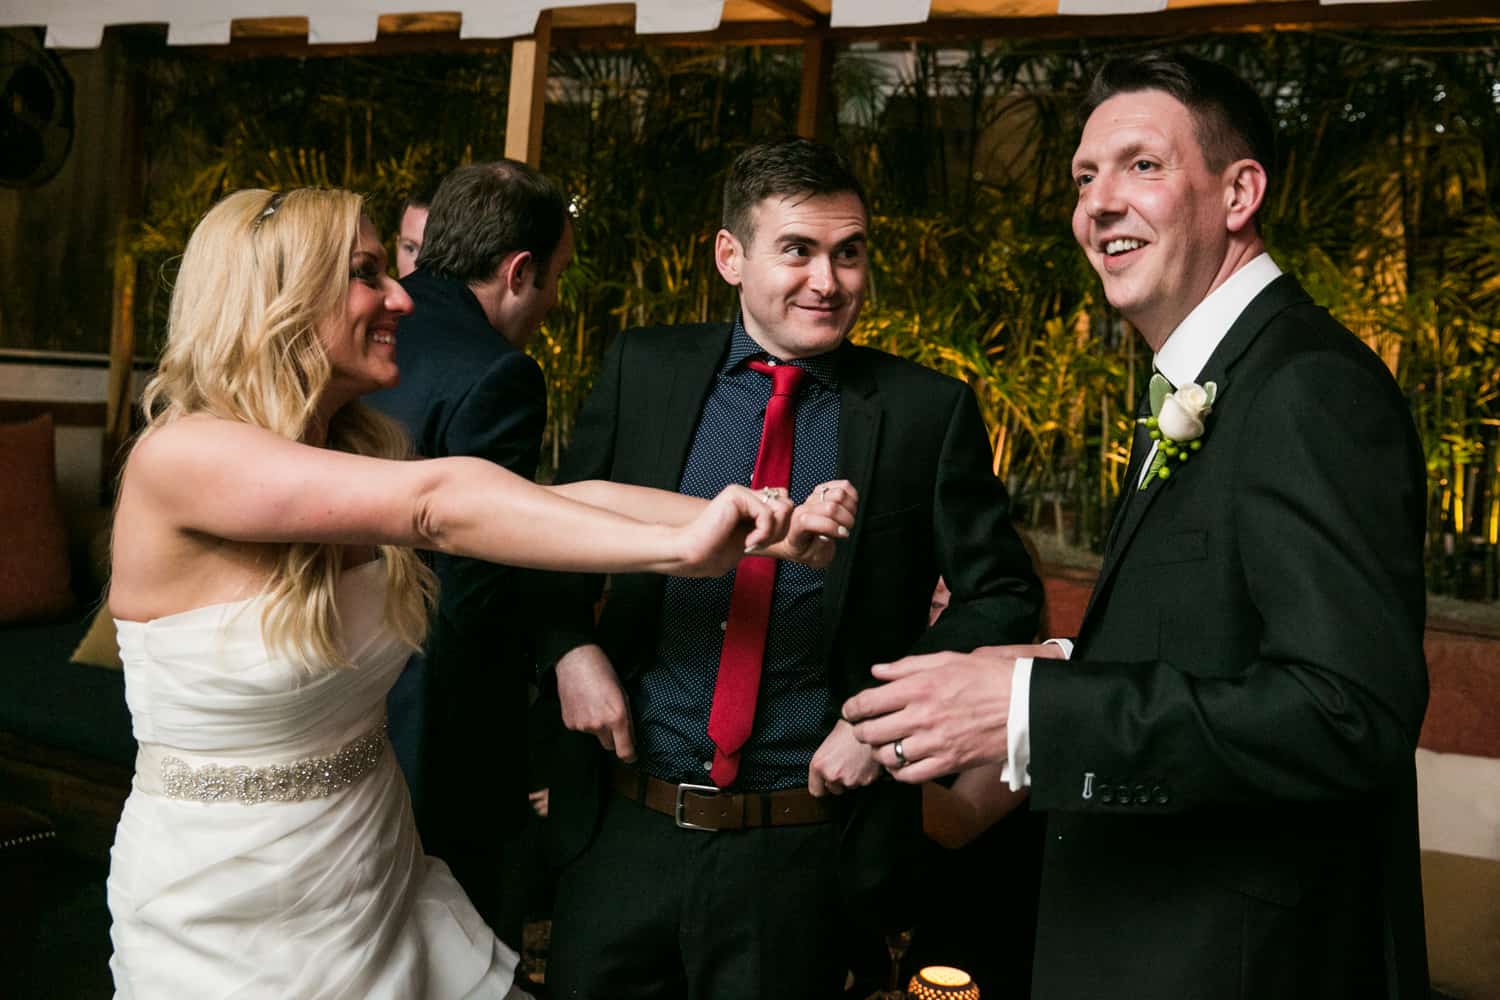 Bride dancing with groom and guest at a Bergdorf Goodman wedding reception